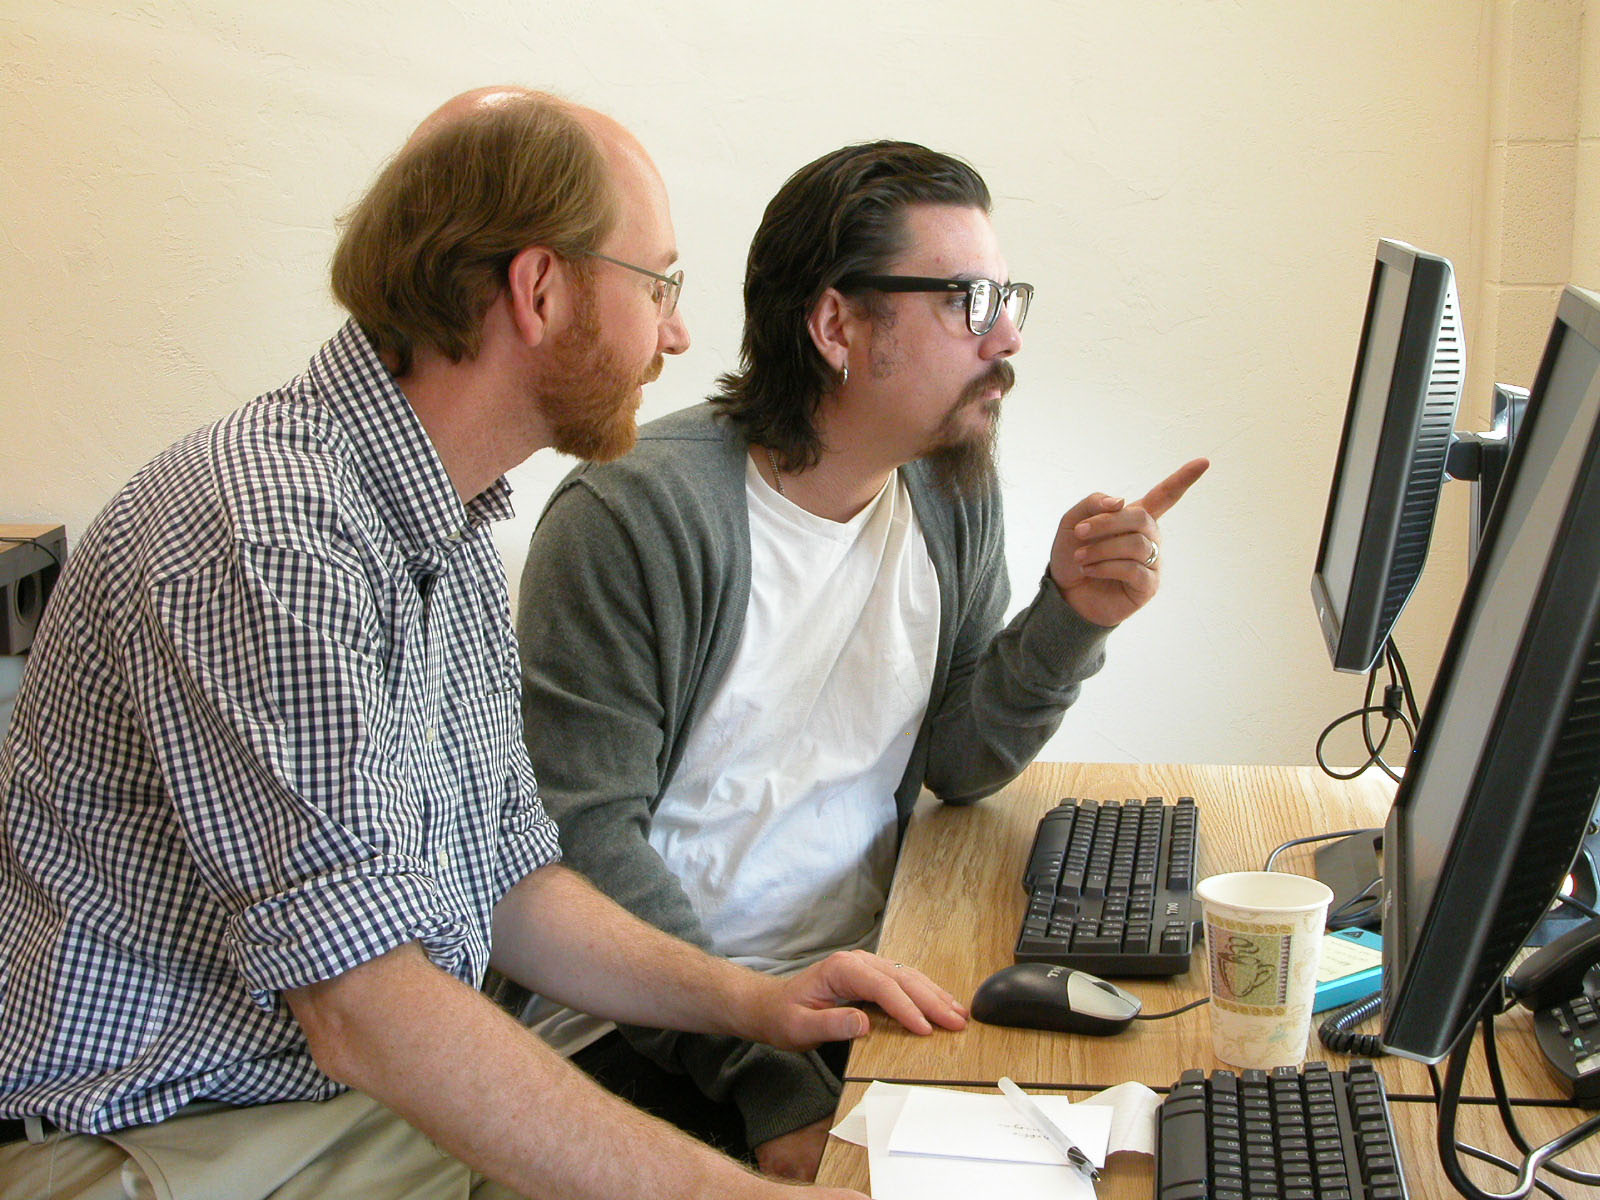 Adrian S. Wisnicki and A.J. Schmitz examine their TEI P5 encoding of Livingstone's Unyanyembe Journal at the Center for Digital Humanities and Culture, Indiana University of Pennsylvania, 2011. Copyright Livingstone Spectral Imaging Project team. Creative Commons Attribution-NonCommercial 3.0 Unported (https://creativecommons.org/licenses/by-nc/3.0/).